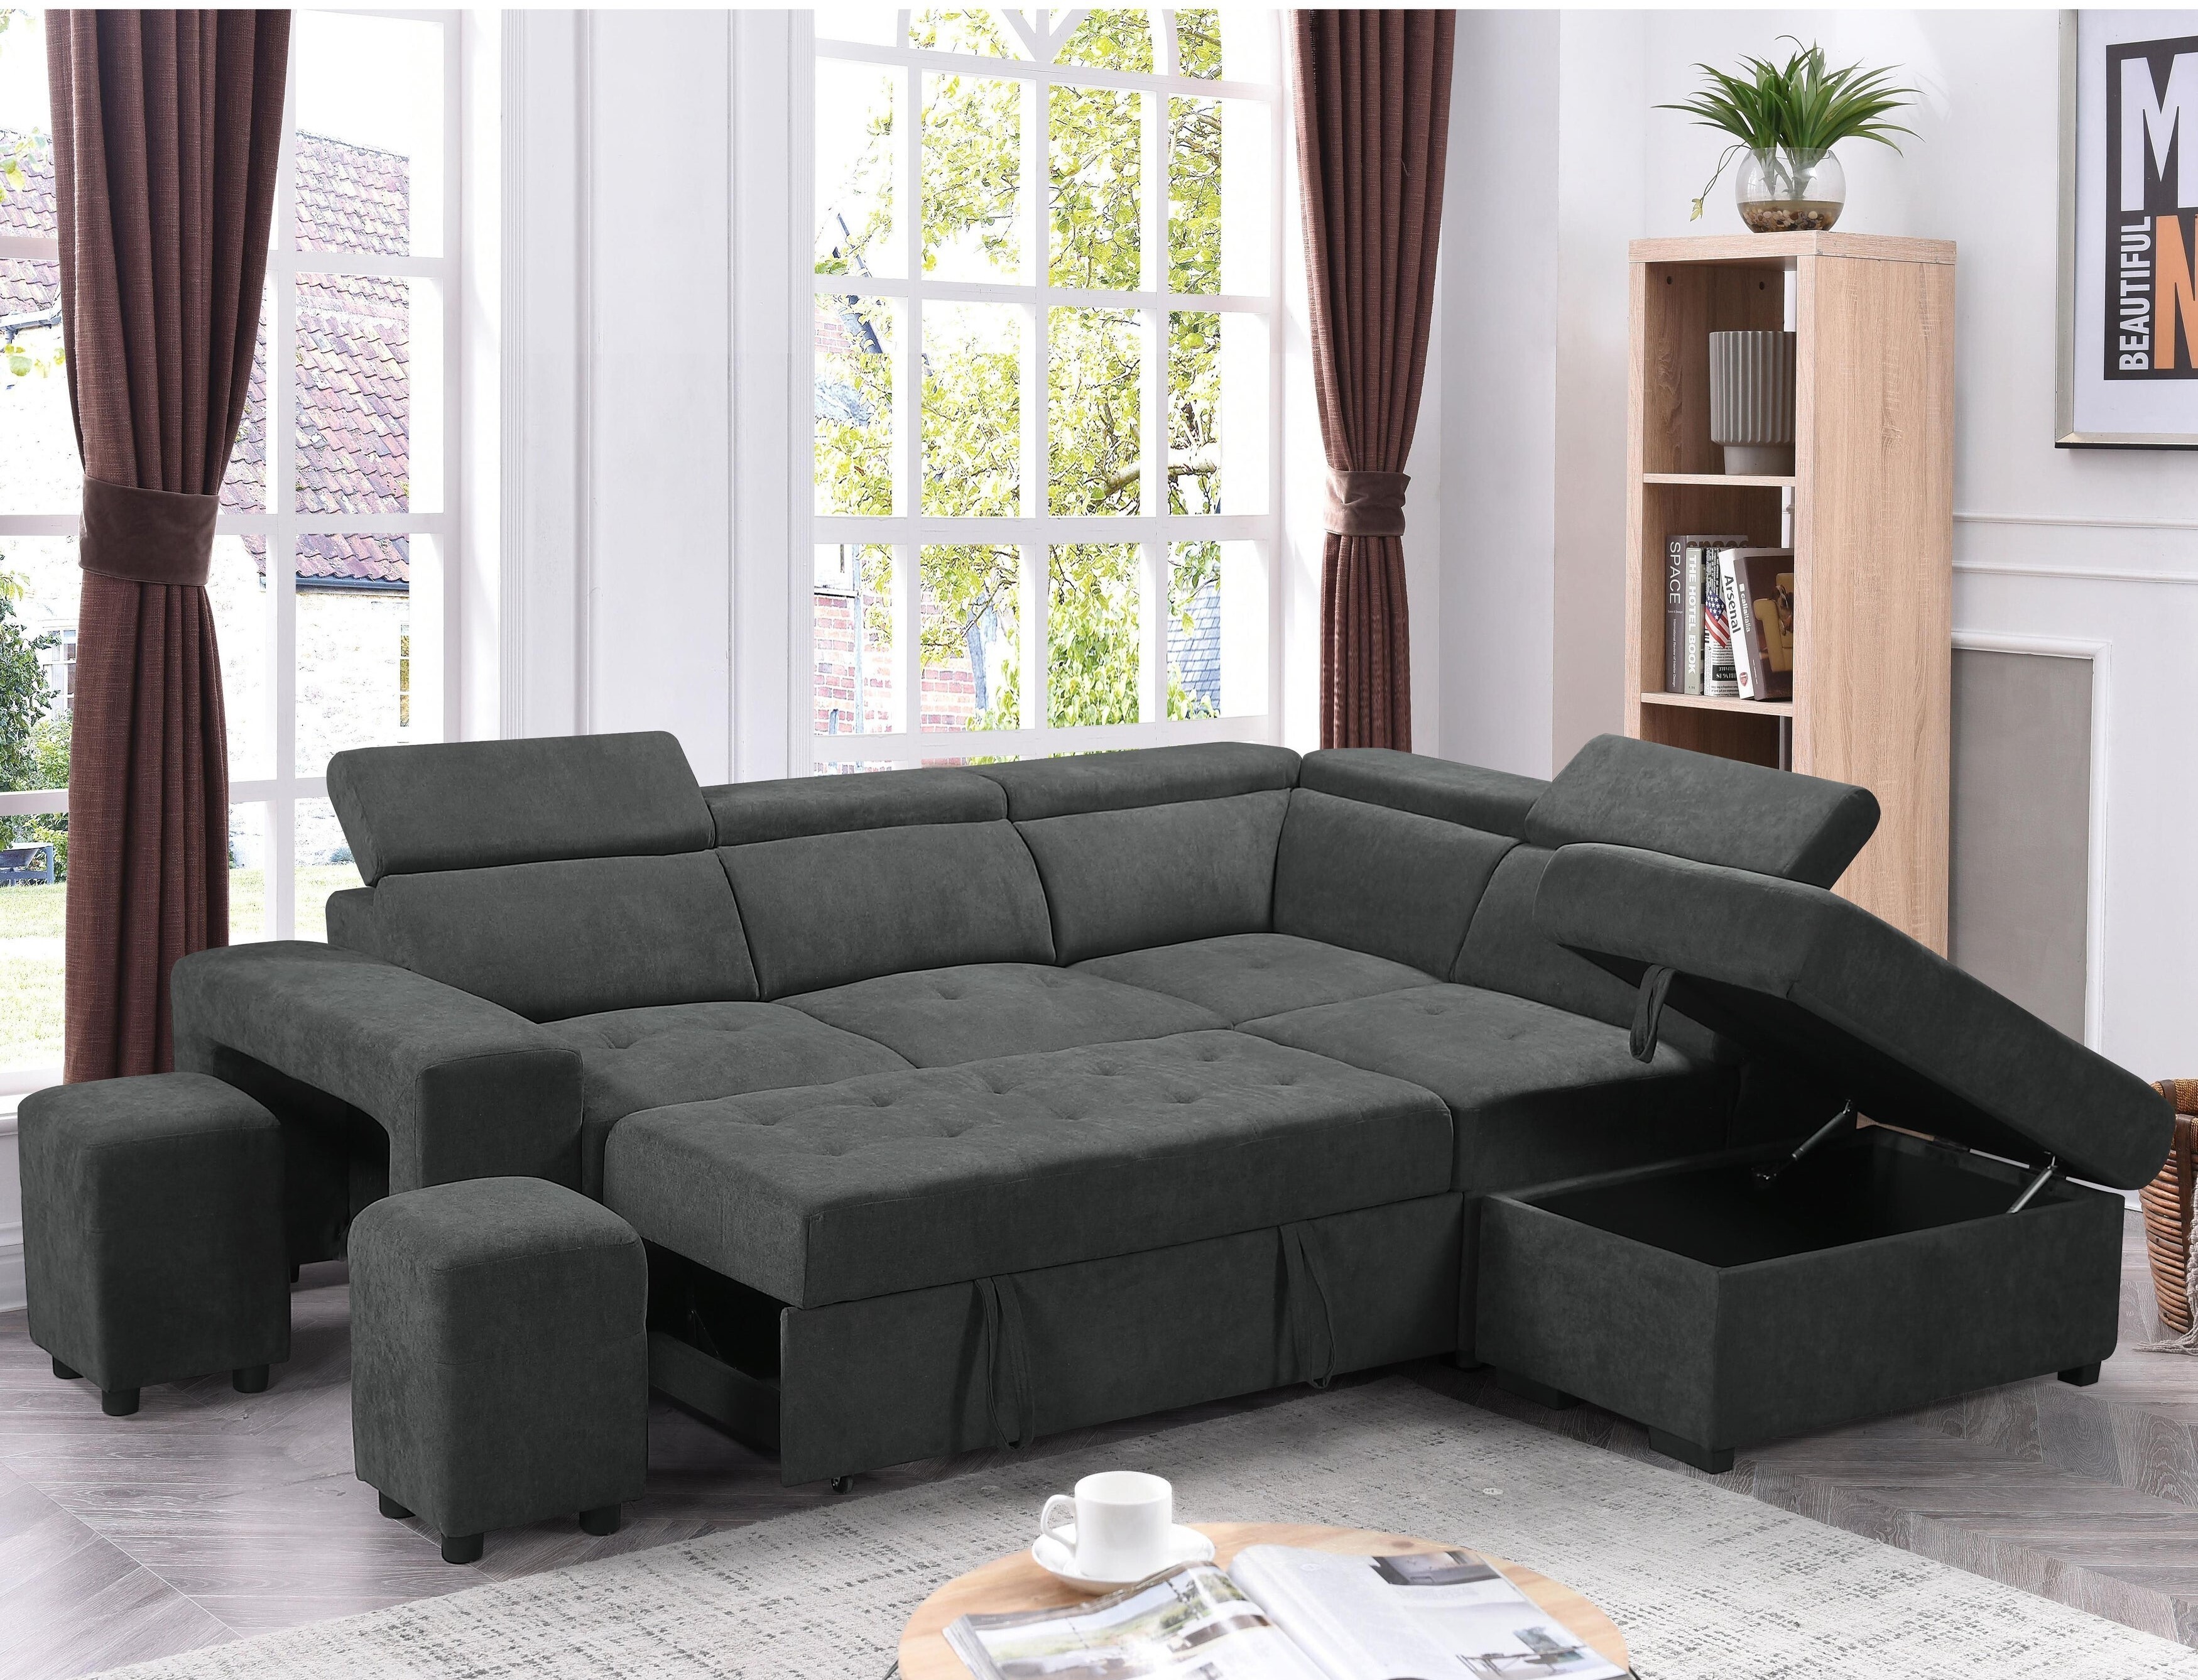 Woven Fabric Sectional Couch